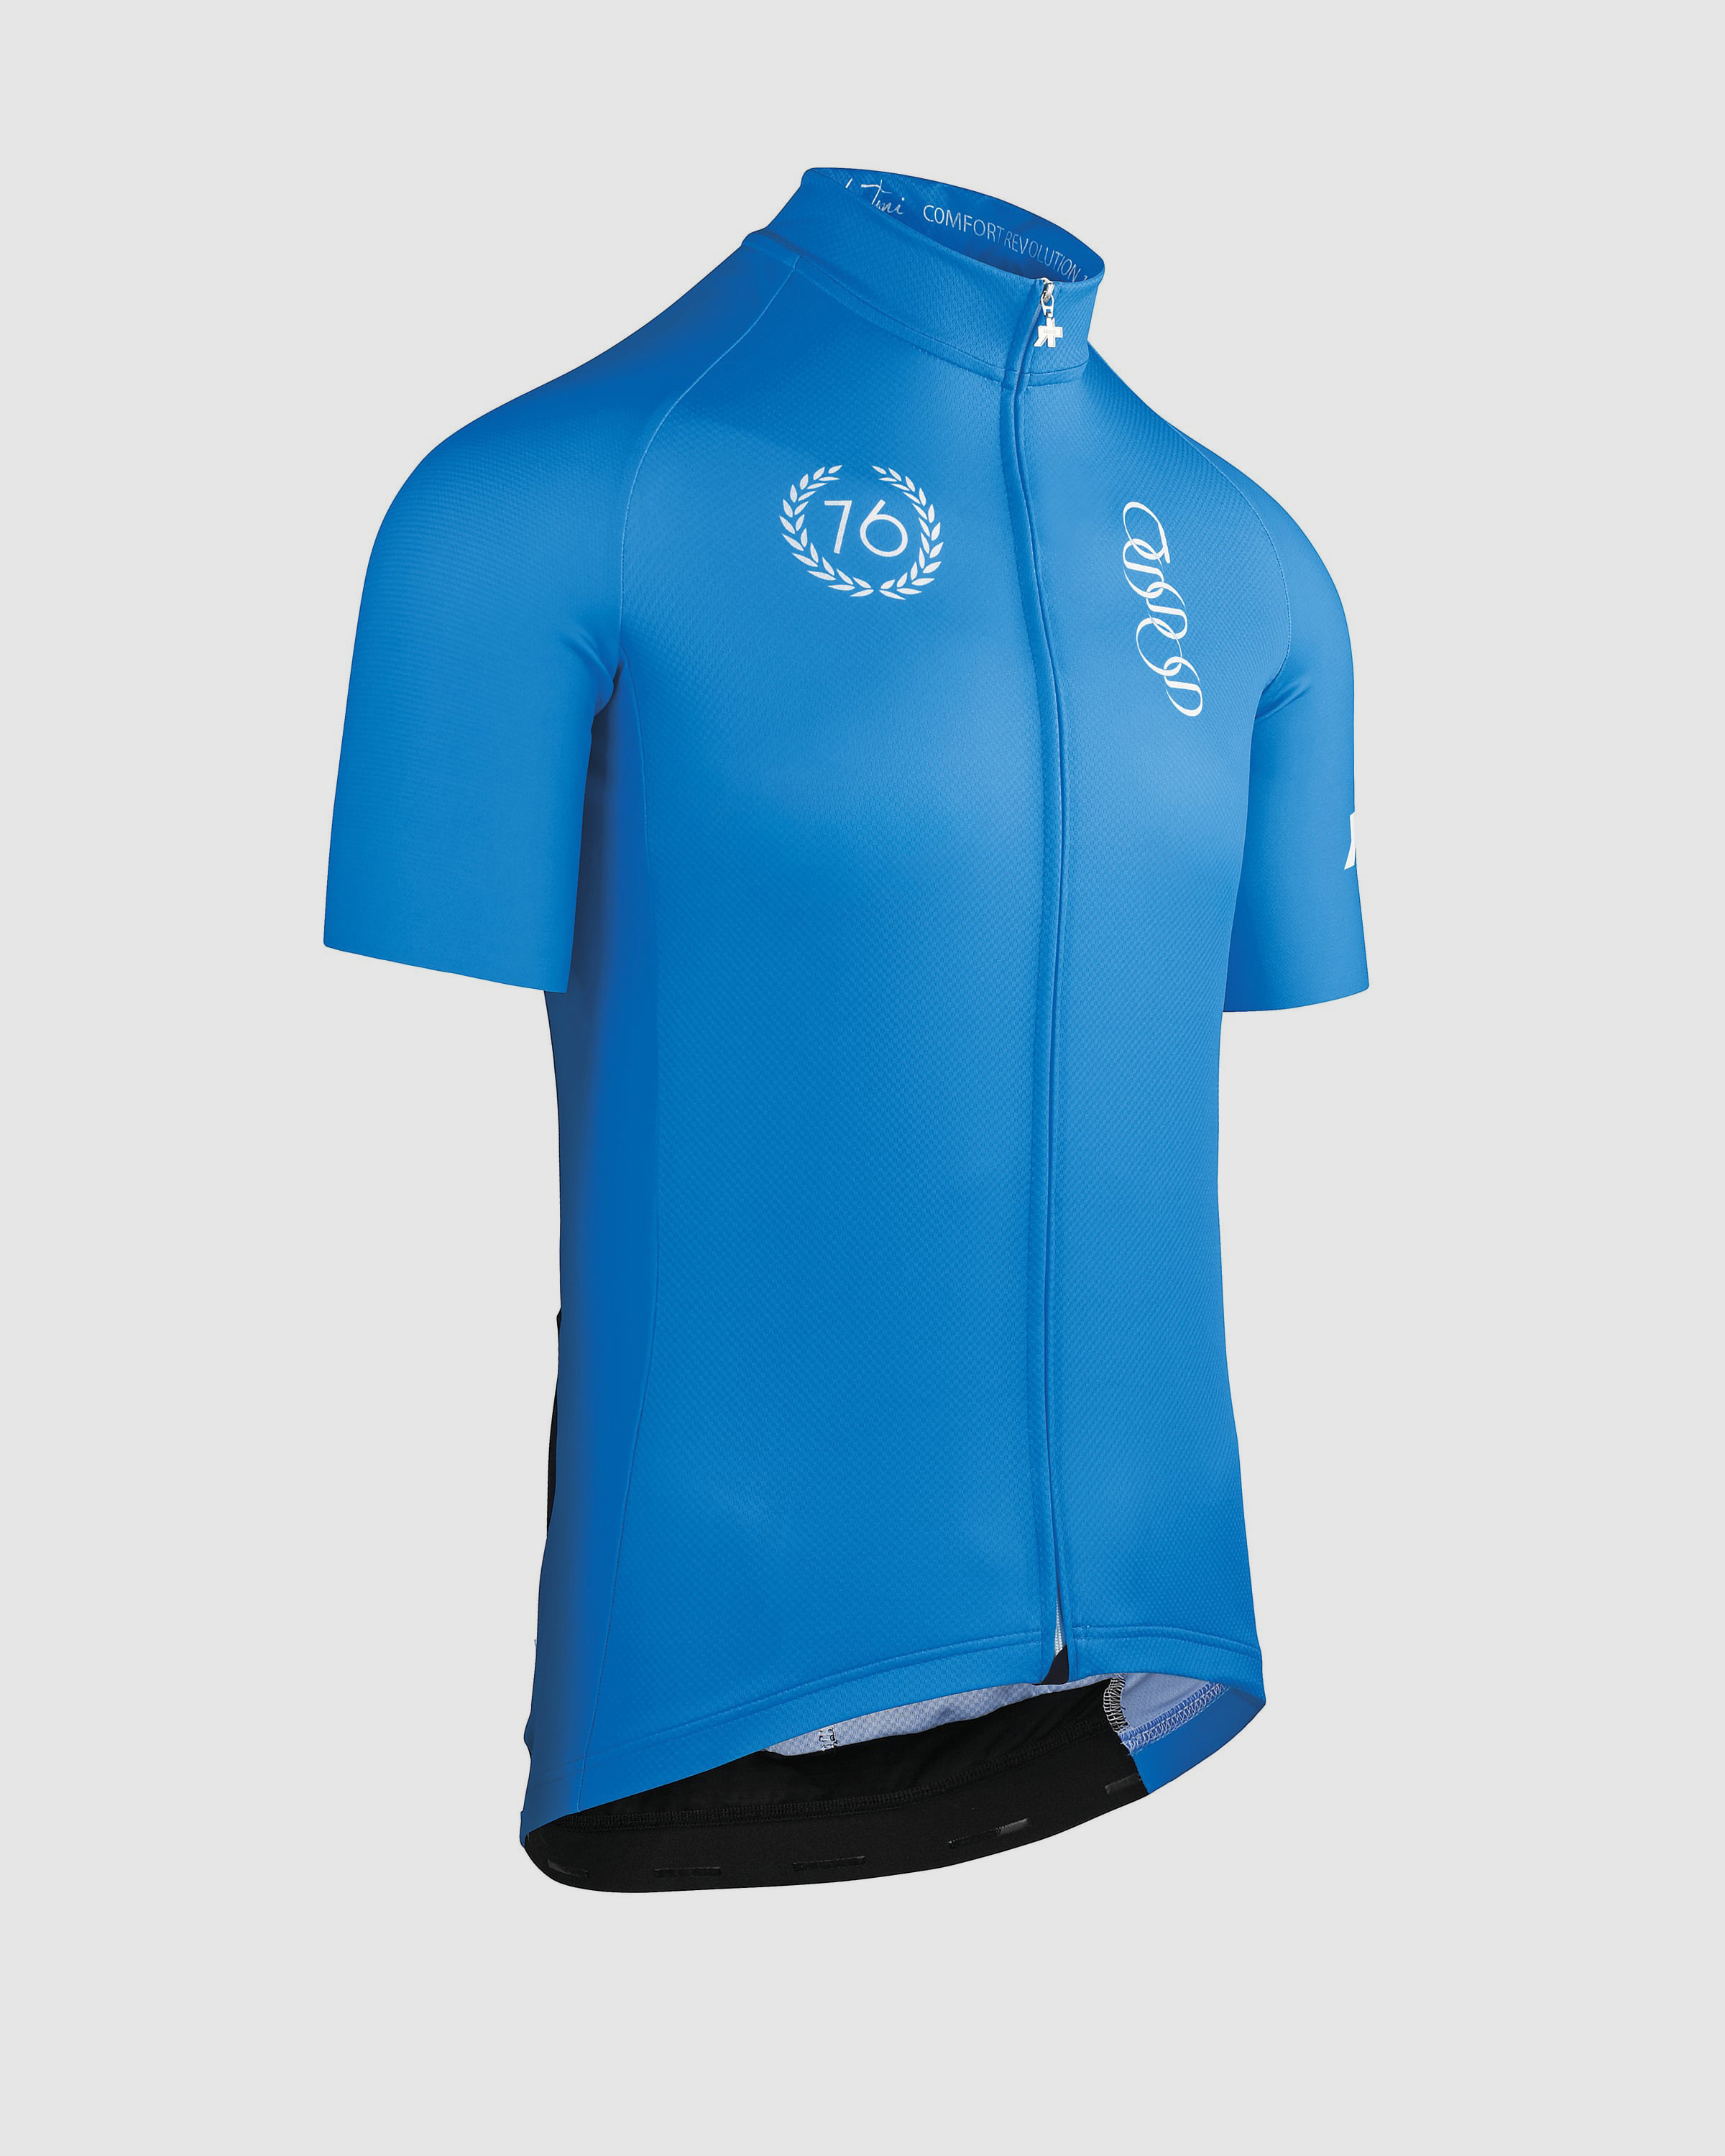 ForToni Short Sleeve Jersey - ASSOS Of Switzerland - Official Outlet